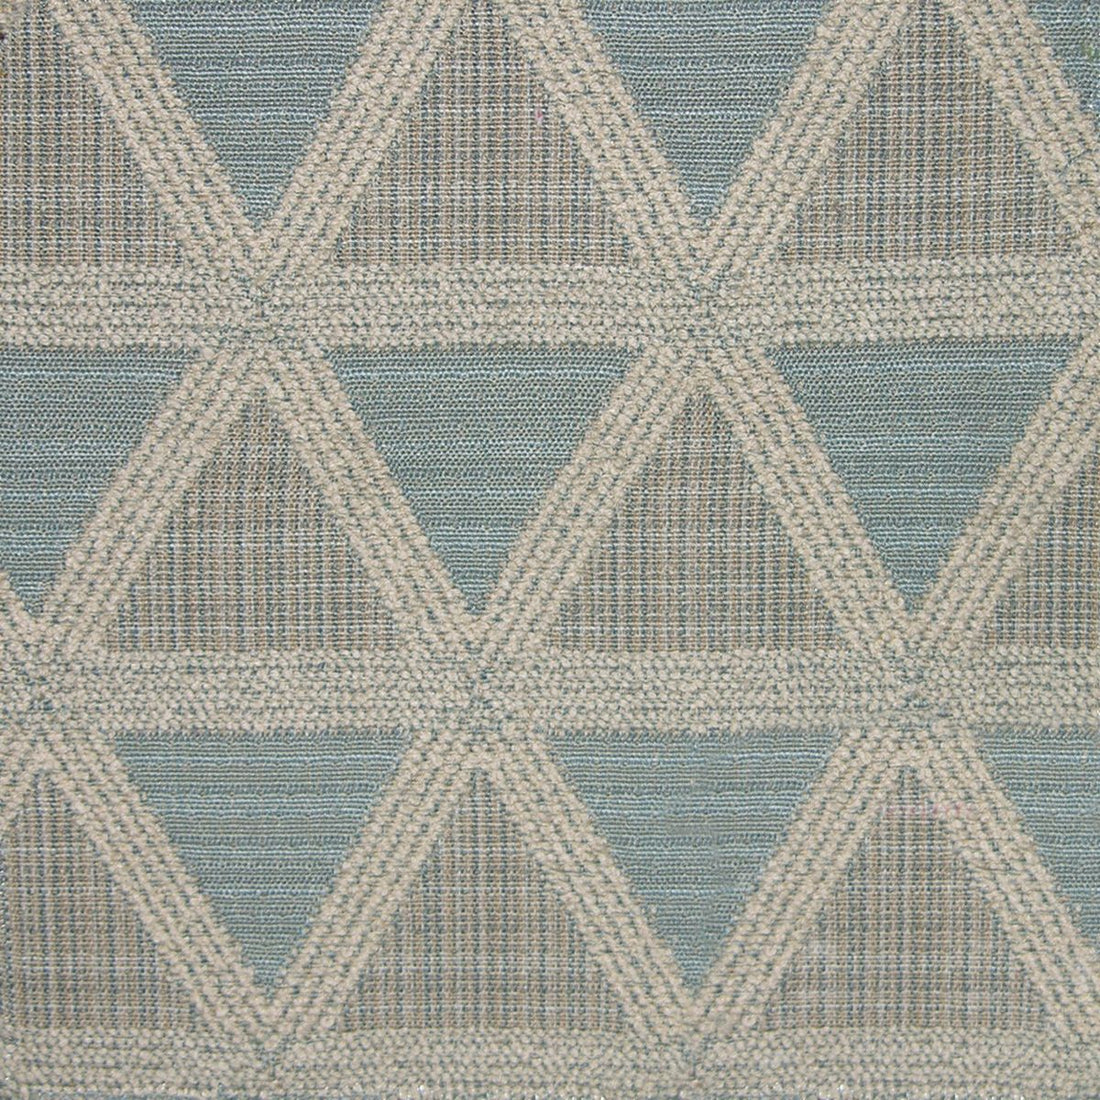 Vienna fabric in blue color - pattern number LW 0FB60001 - by Scalamandre in the Old World Weavers collection